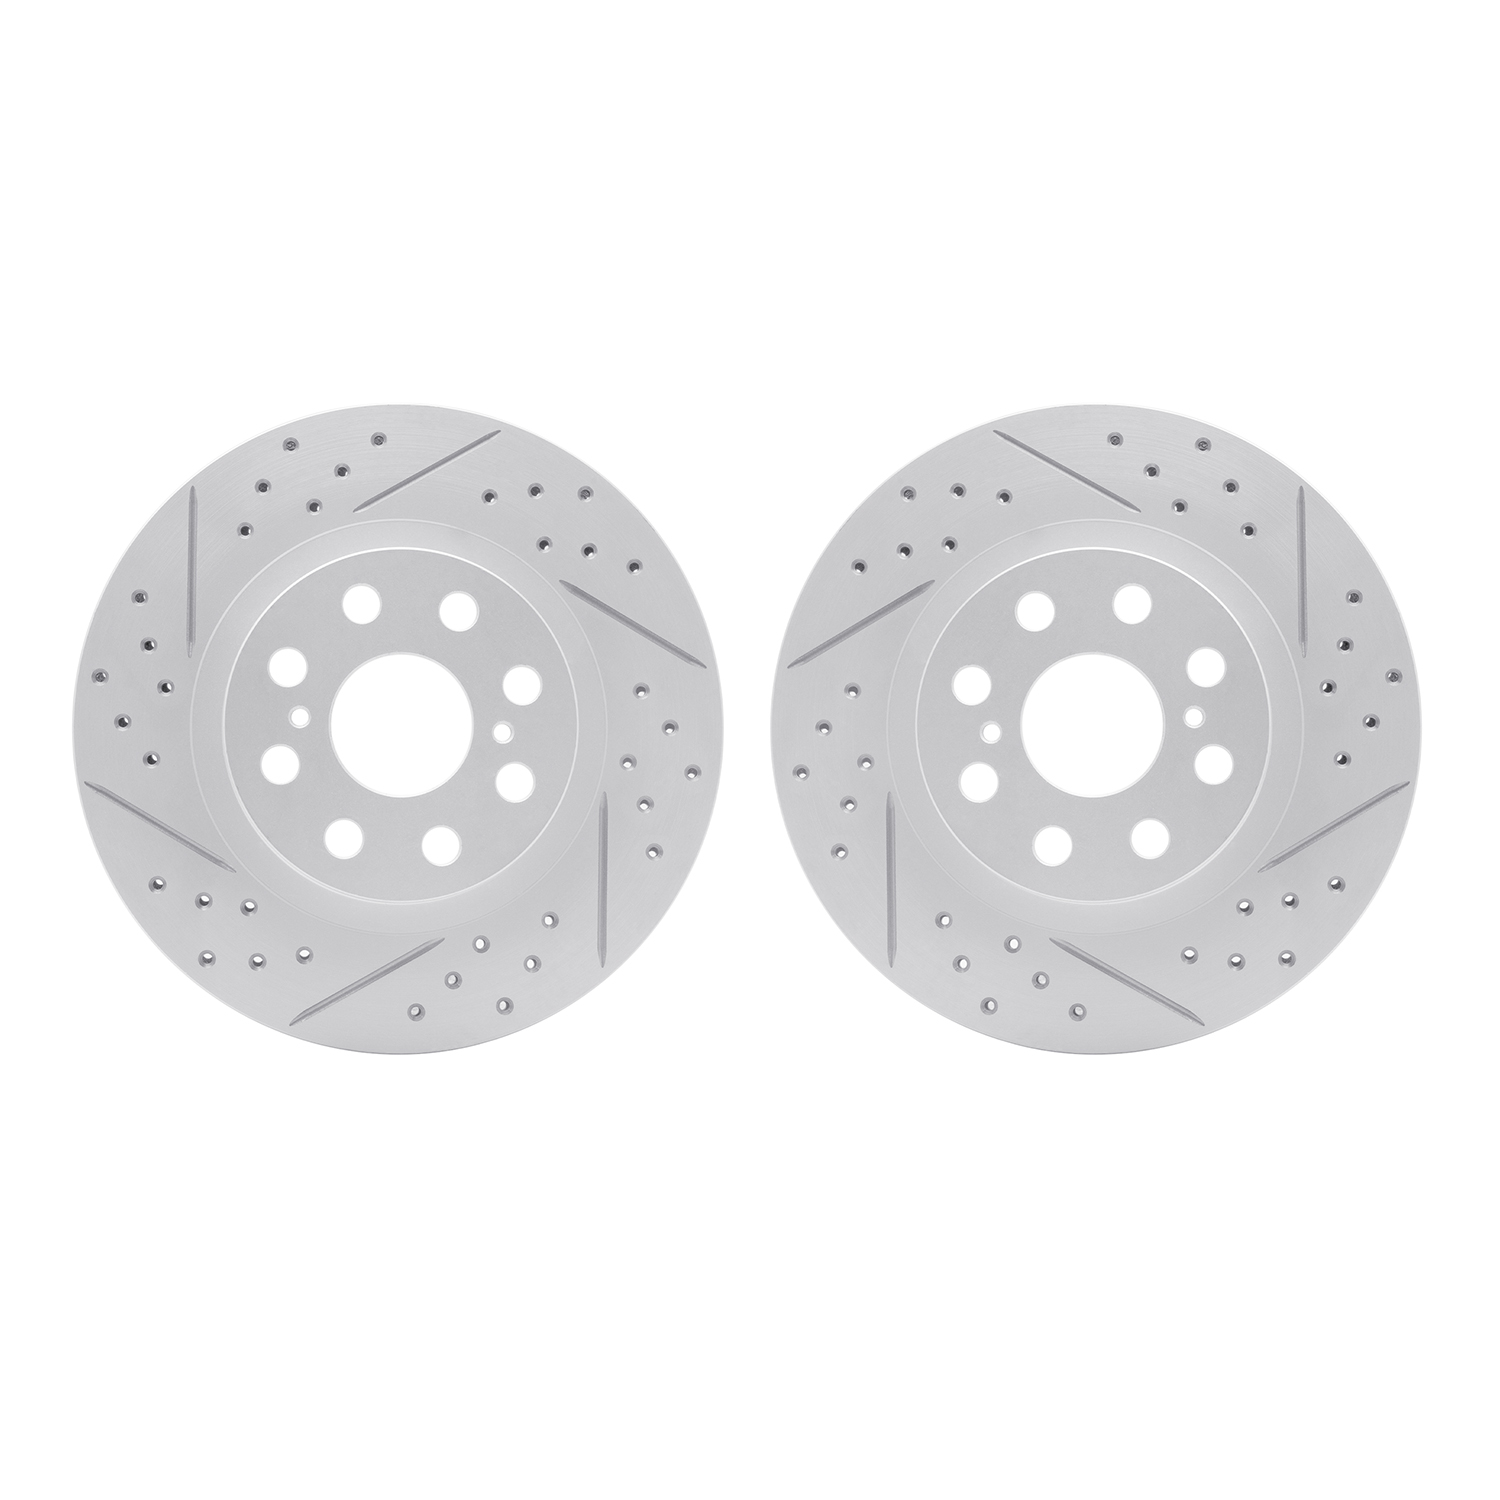 2002-76064 Geoperformance Drilled/Slotted Brake Rotors, 2000-2005 Lexus/Toyota/Scion, Position: Rear